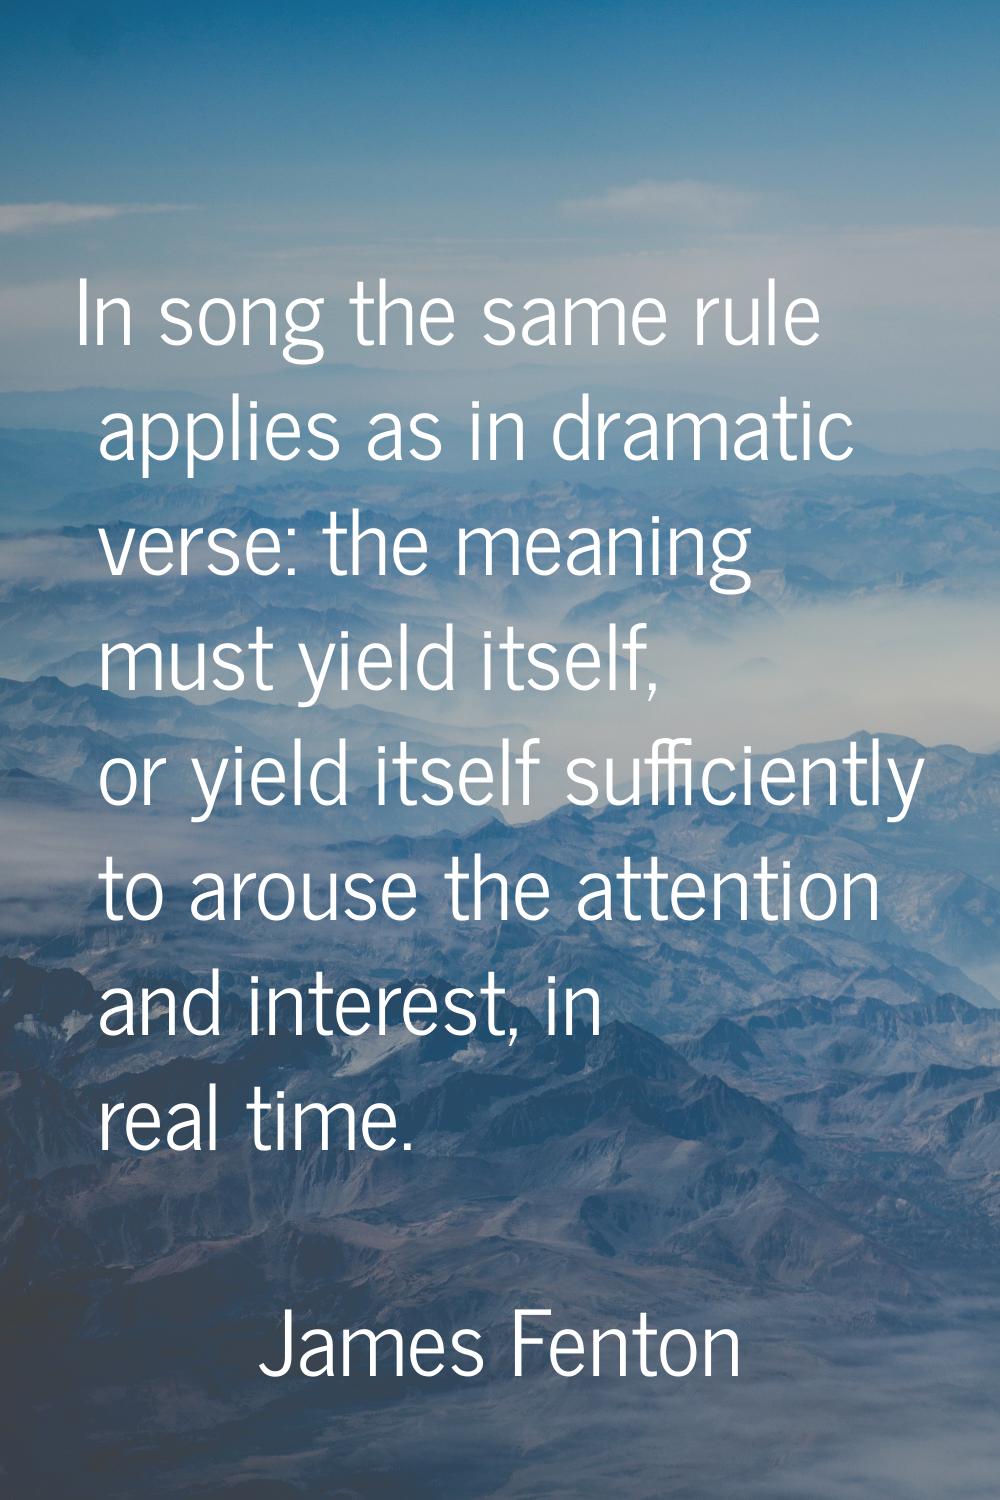 In song the same rule applies as in dramatic verse: the meaning must yield itself, or yield itself 